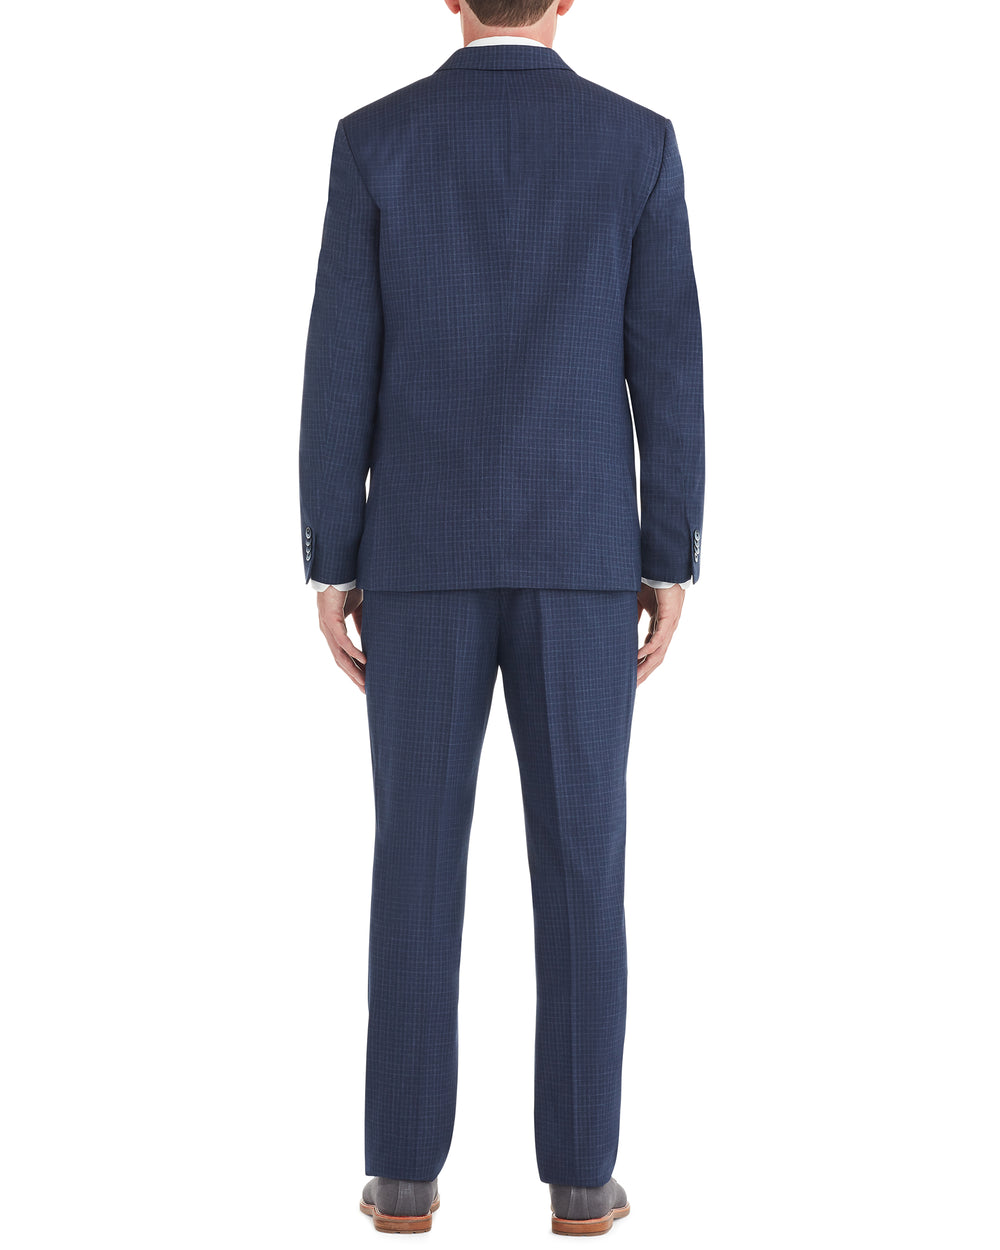 Bell Check Single-Breasted Suit - Blue